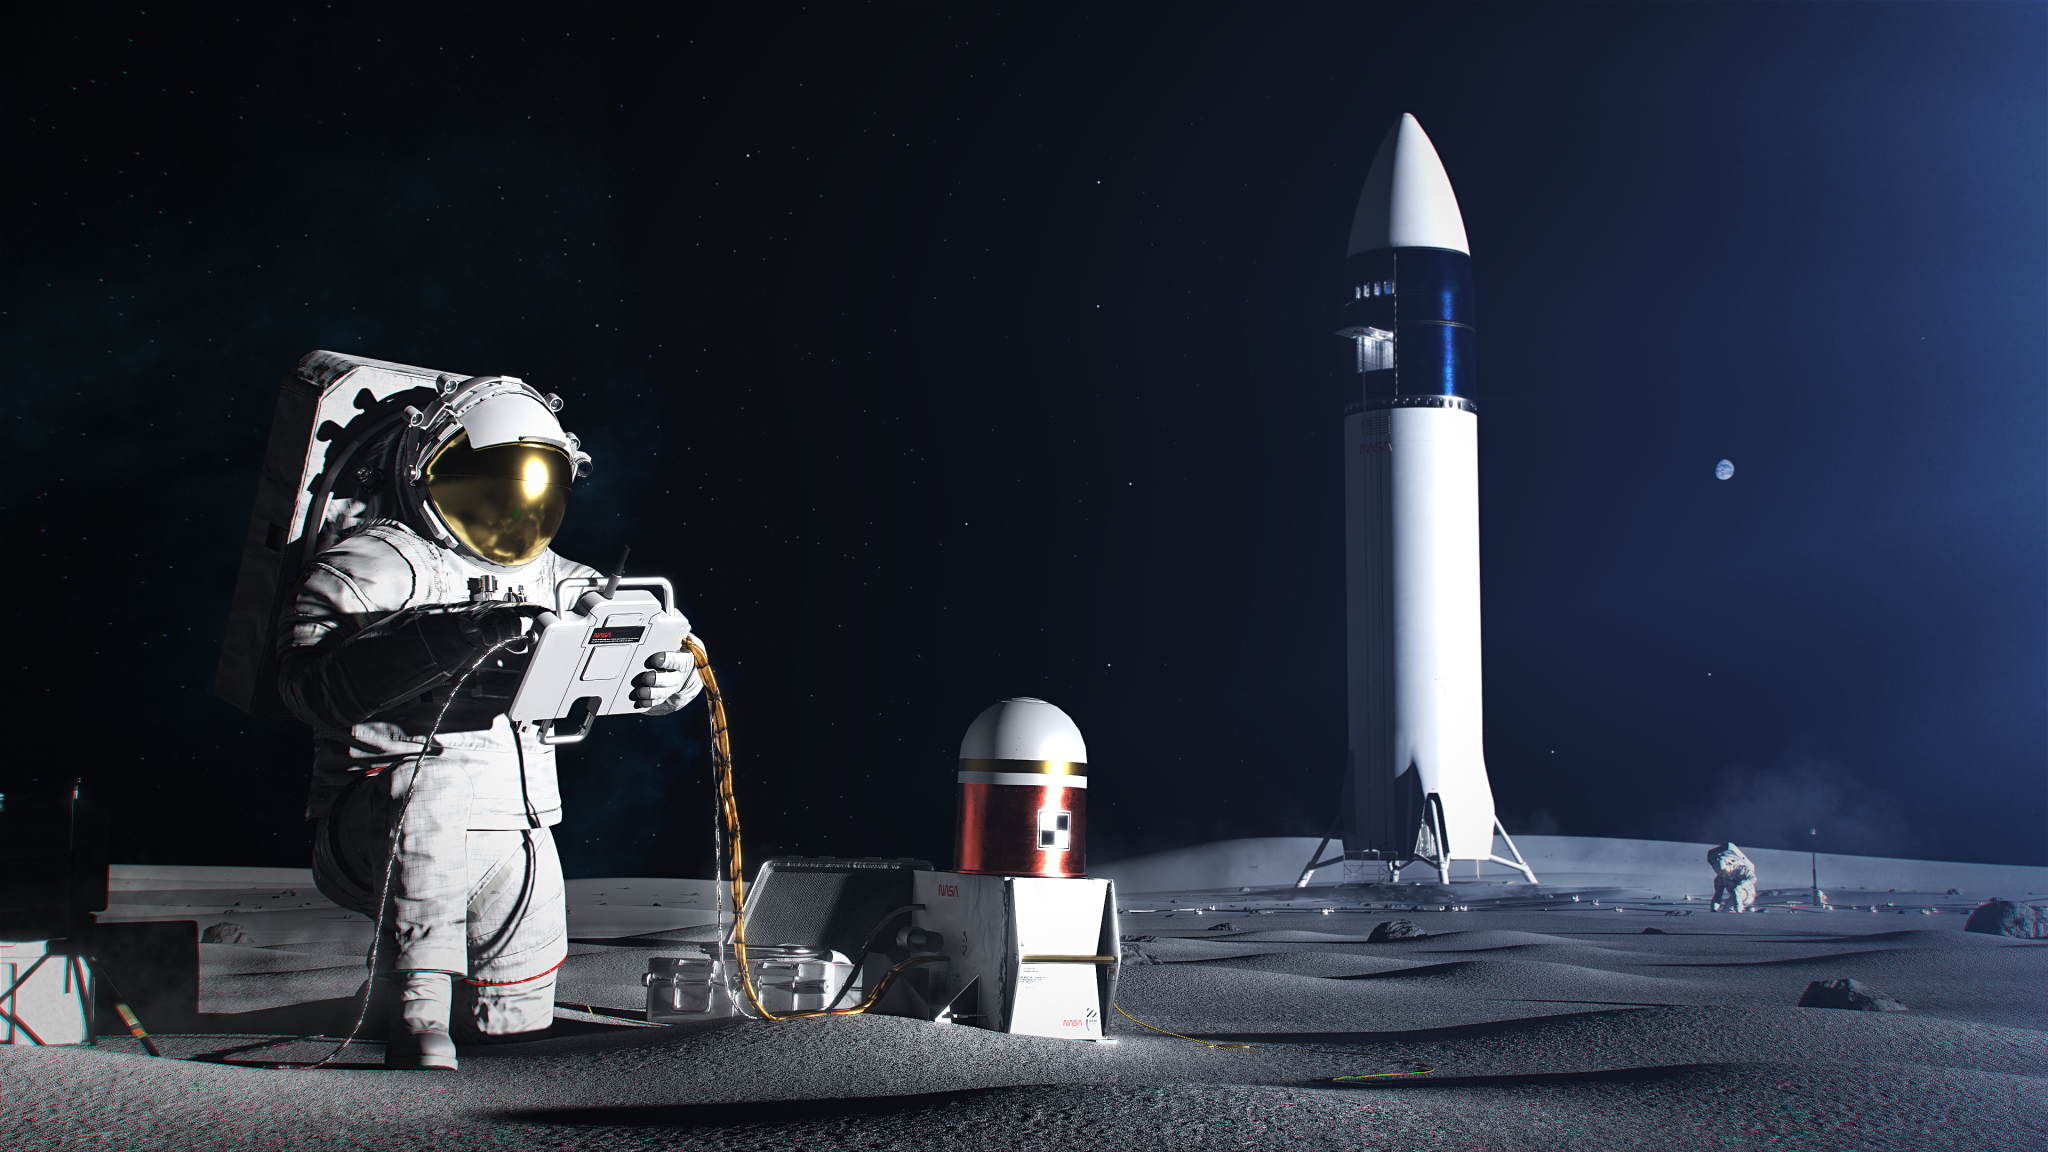 Astronaut on lunar surface with equipment. Earth in distant sky.